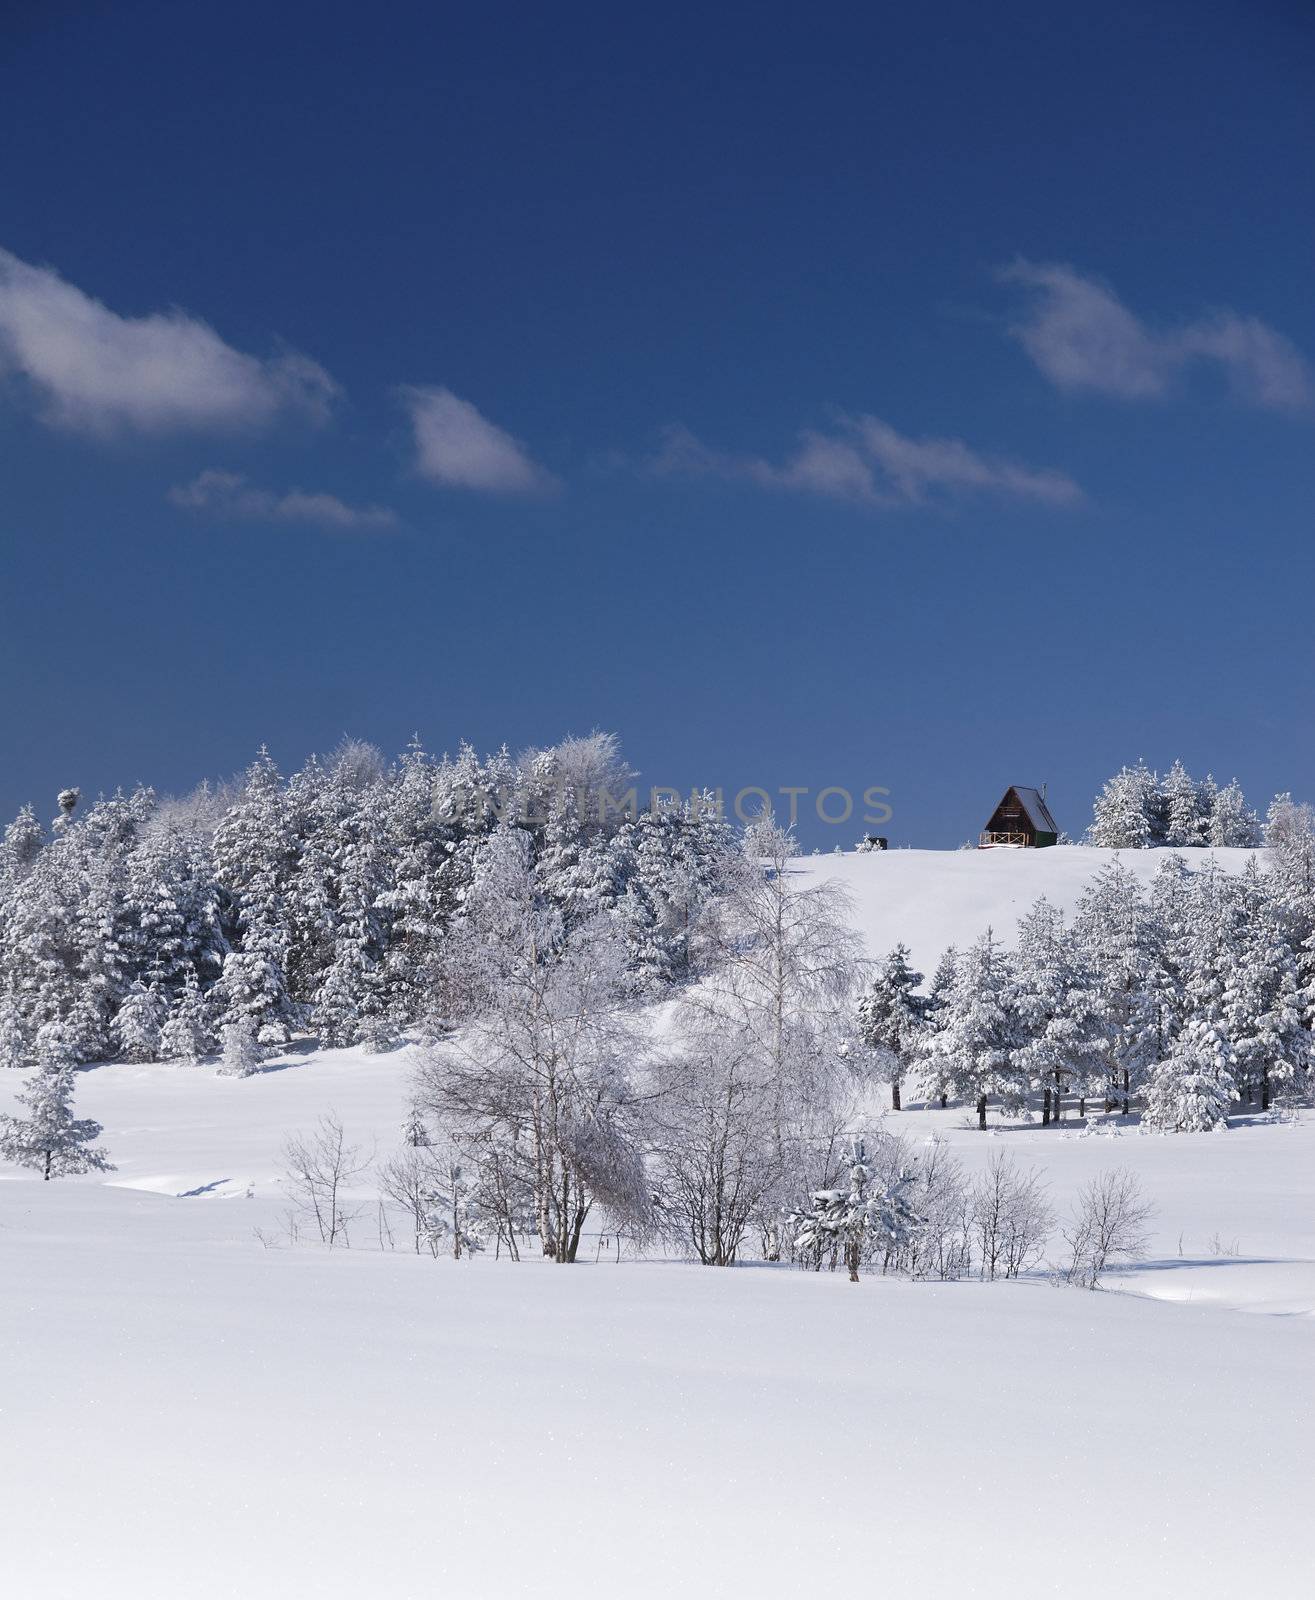 Litle House on Hill - Winter Scene by adamr